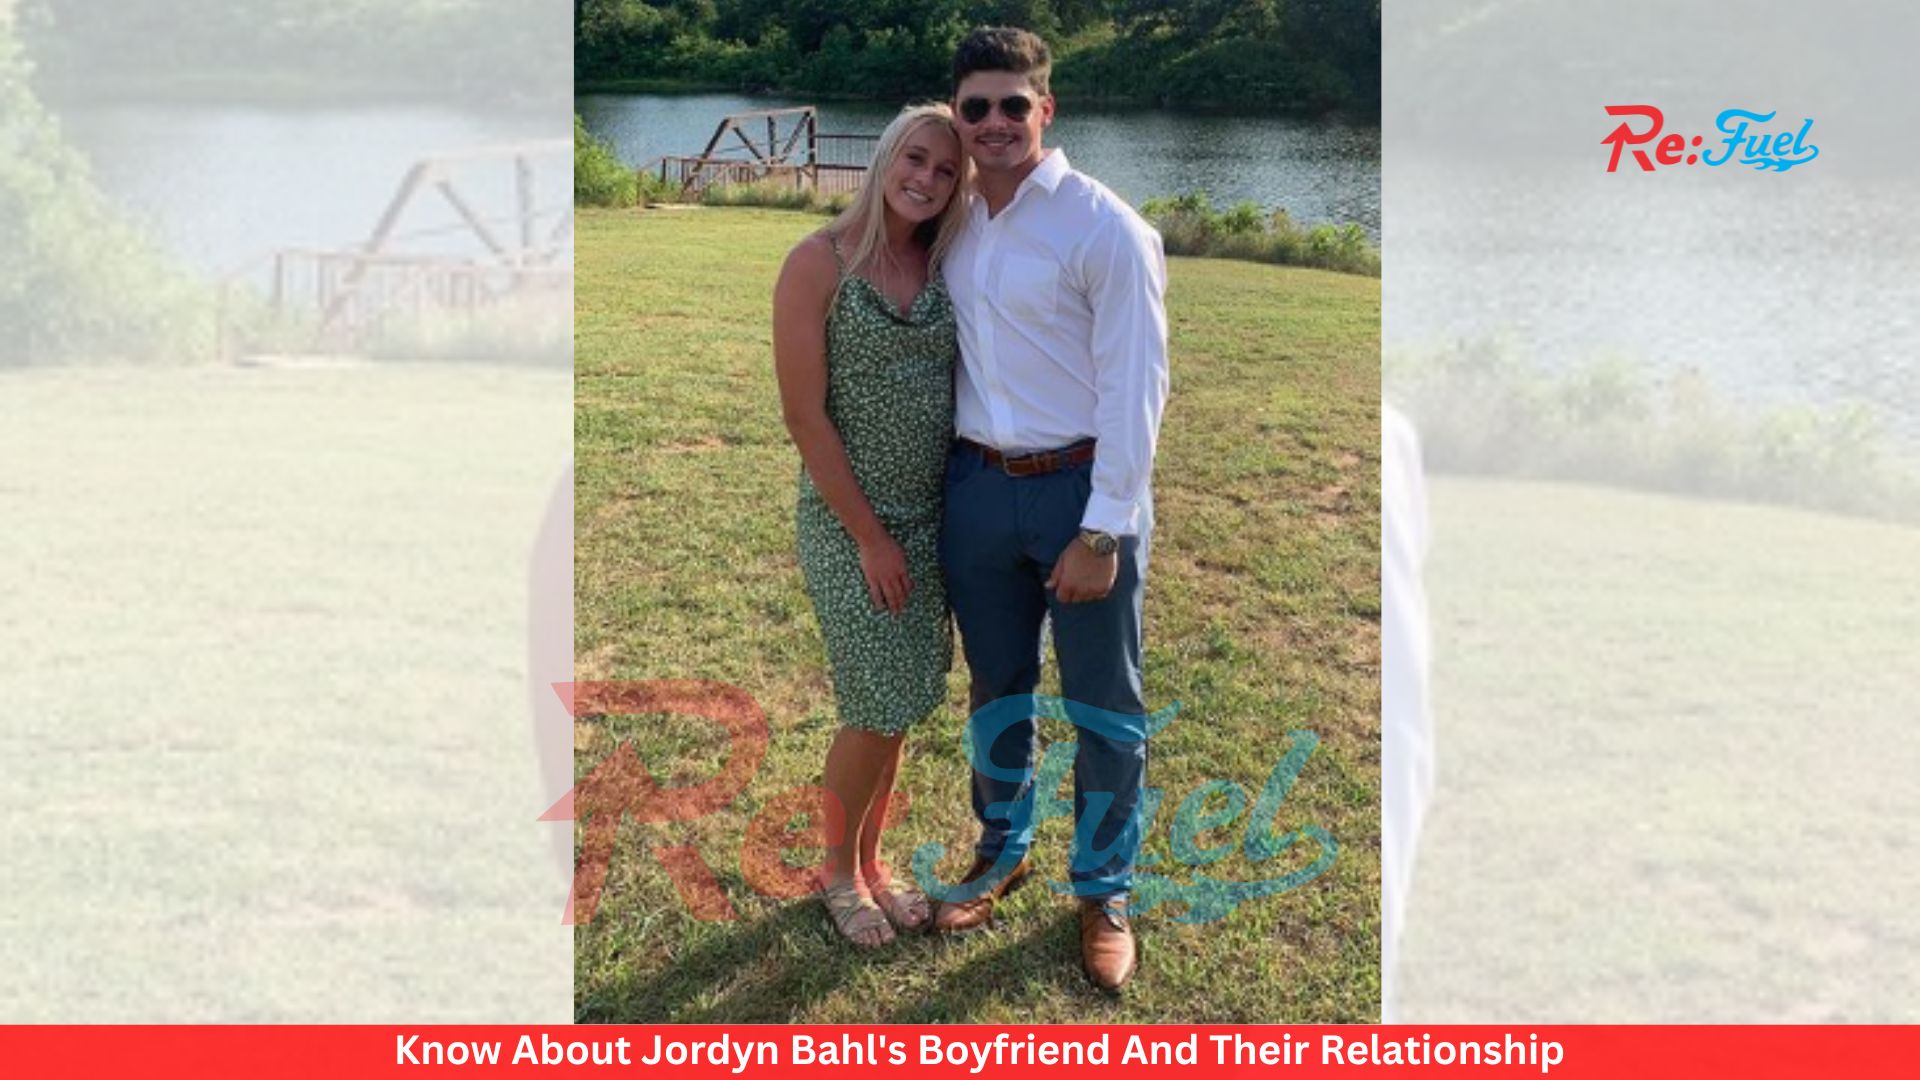 Know About Jordyn Bahl's Boyfriend And Their Relationship